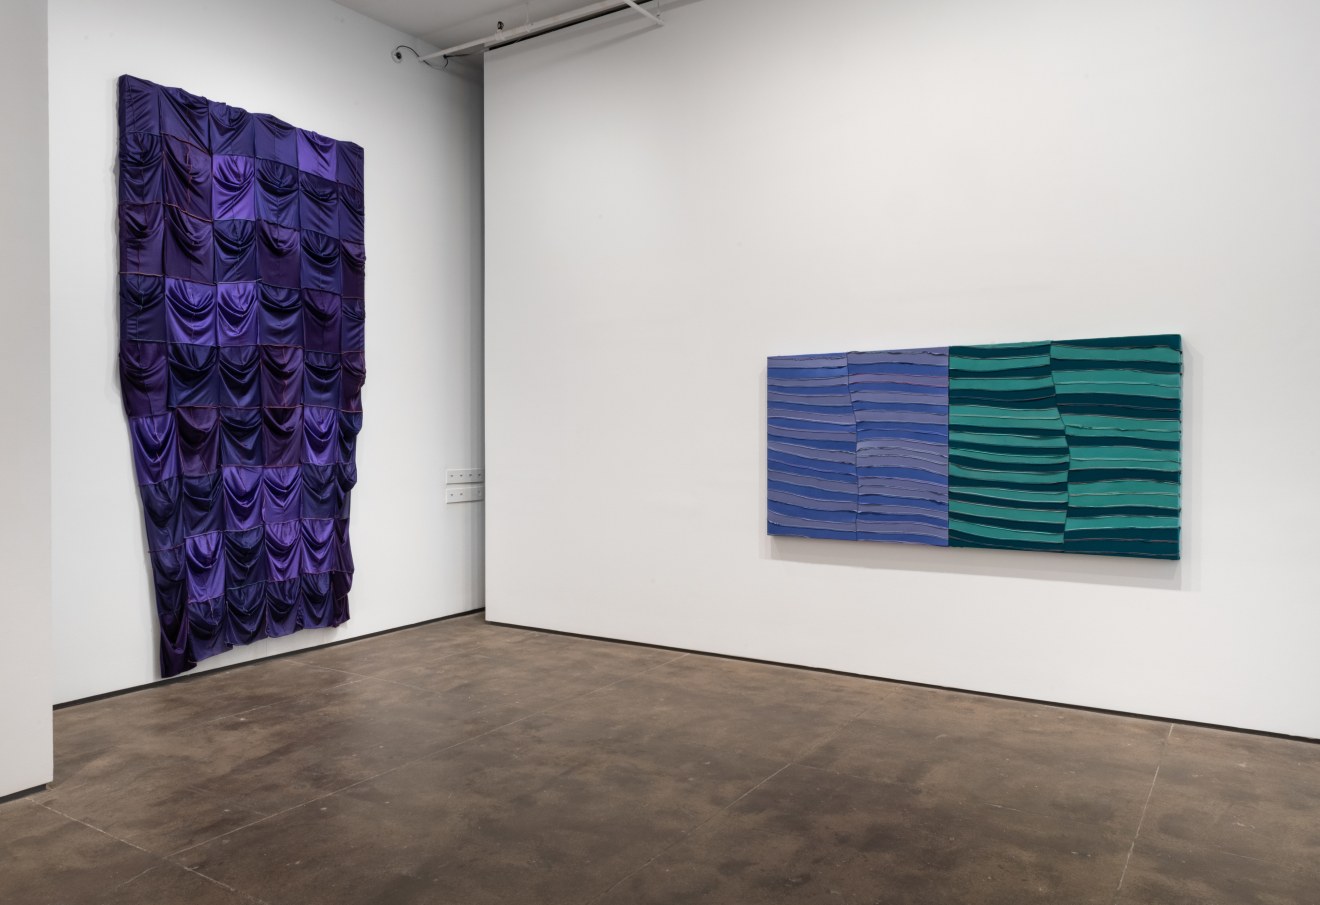 Installation view of Anthony Akinbola: Natural Beauty at Sean Kelly, New York, September 8 - October 22, 2022, Photography: Adam Reich, Courtesy: Sean Kelly